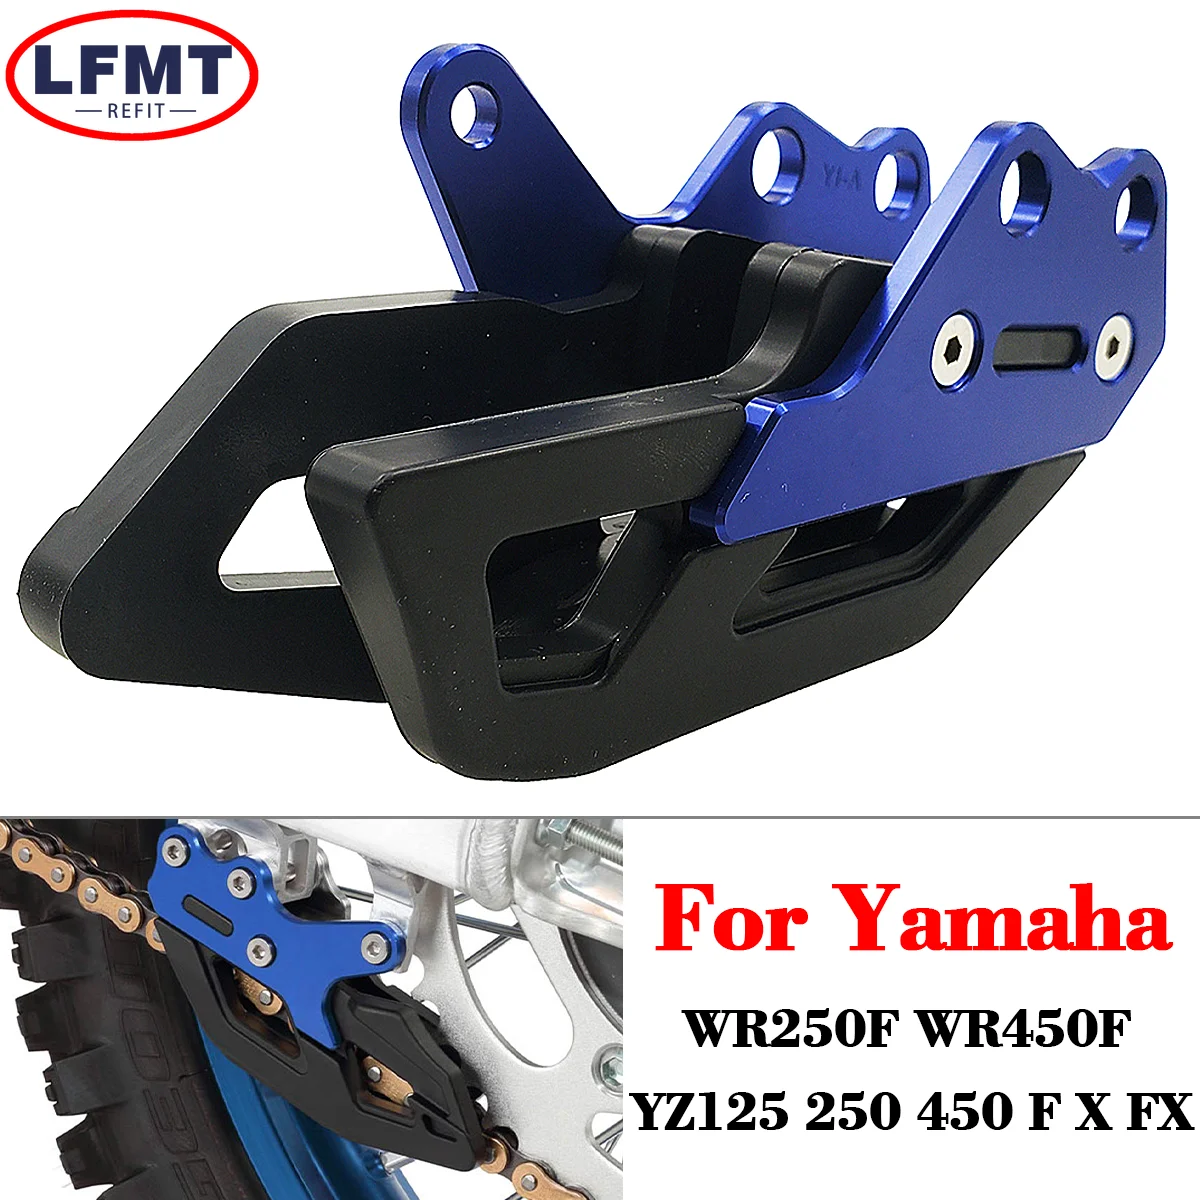 

For Yamaha YZ125 YZ250 YZ250F YZ450F YZ125X YZ250X YZ250FX YZ450FX WR250F WR450F 08-2022 Motorcycle Chain Guide Guard Protection